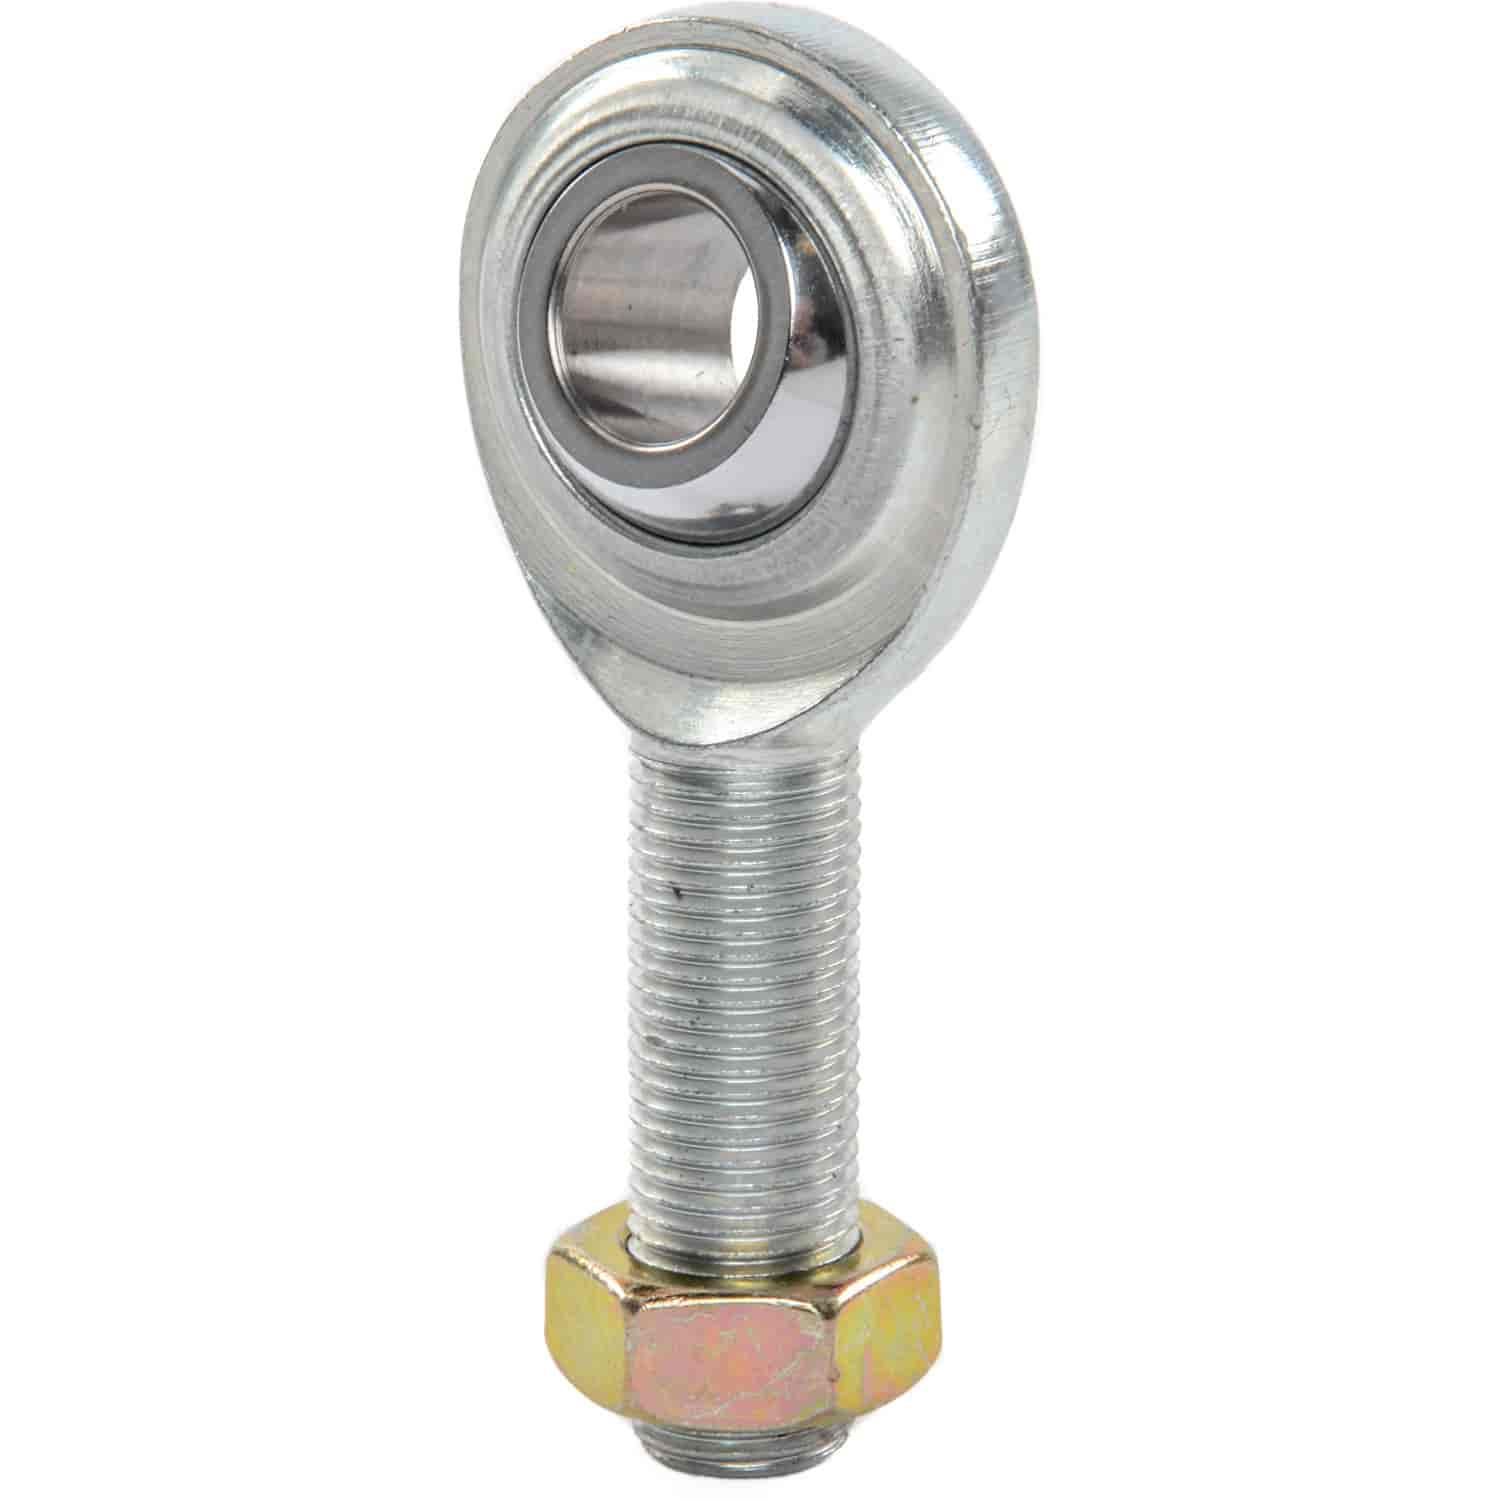 Two-Piece Rod End with Jam Nut 1/2